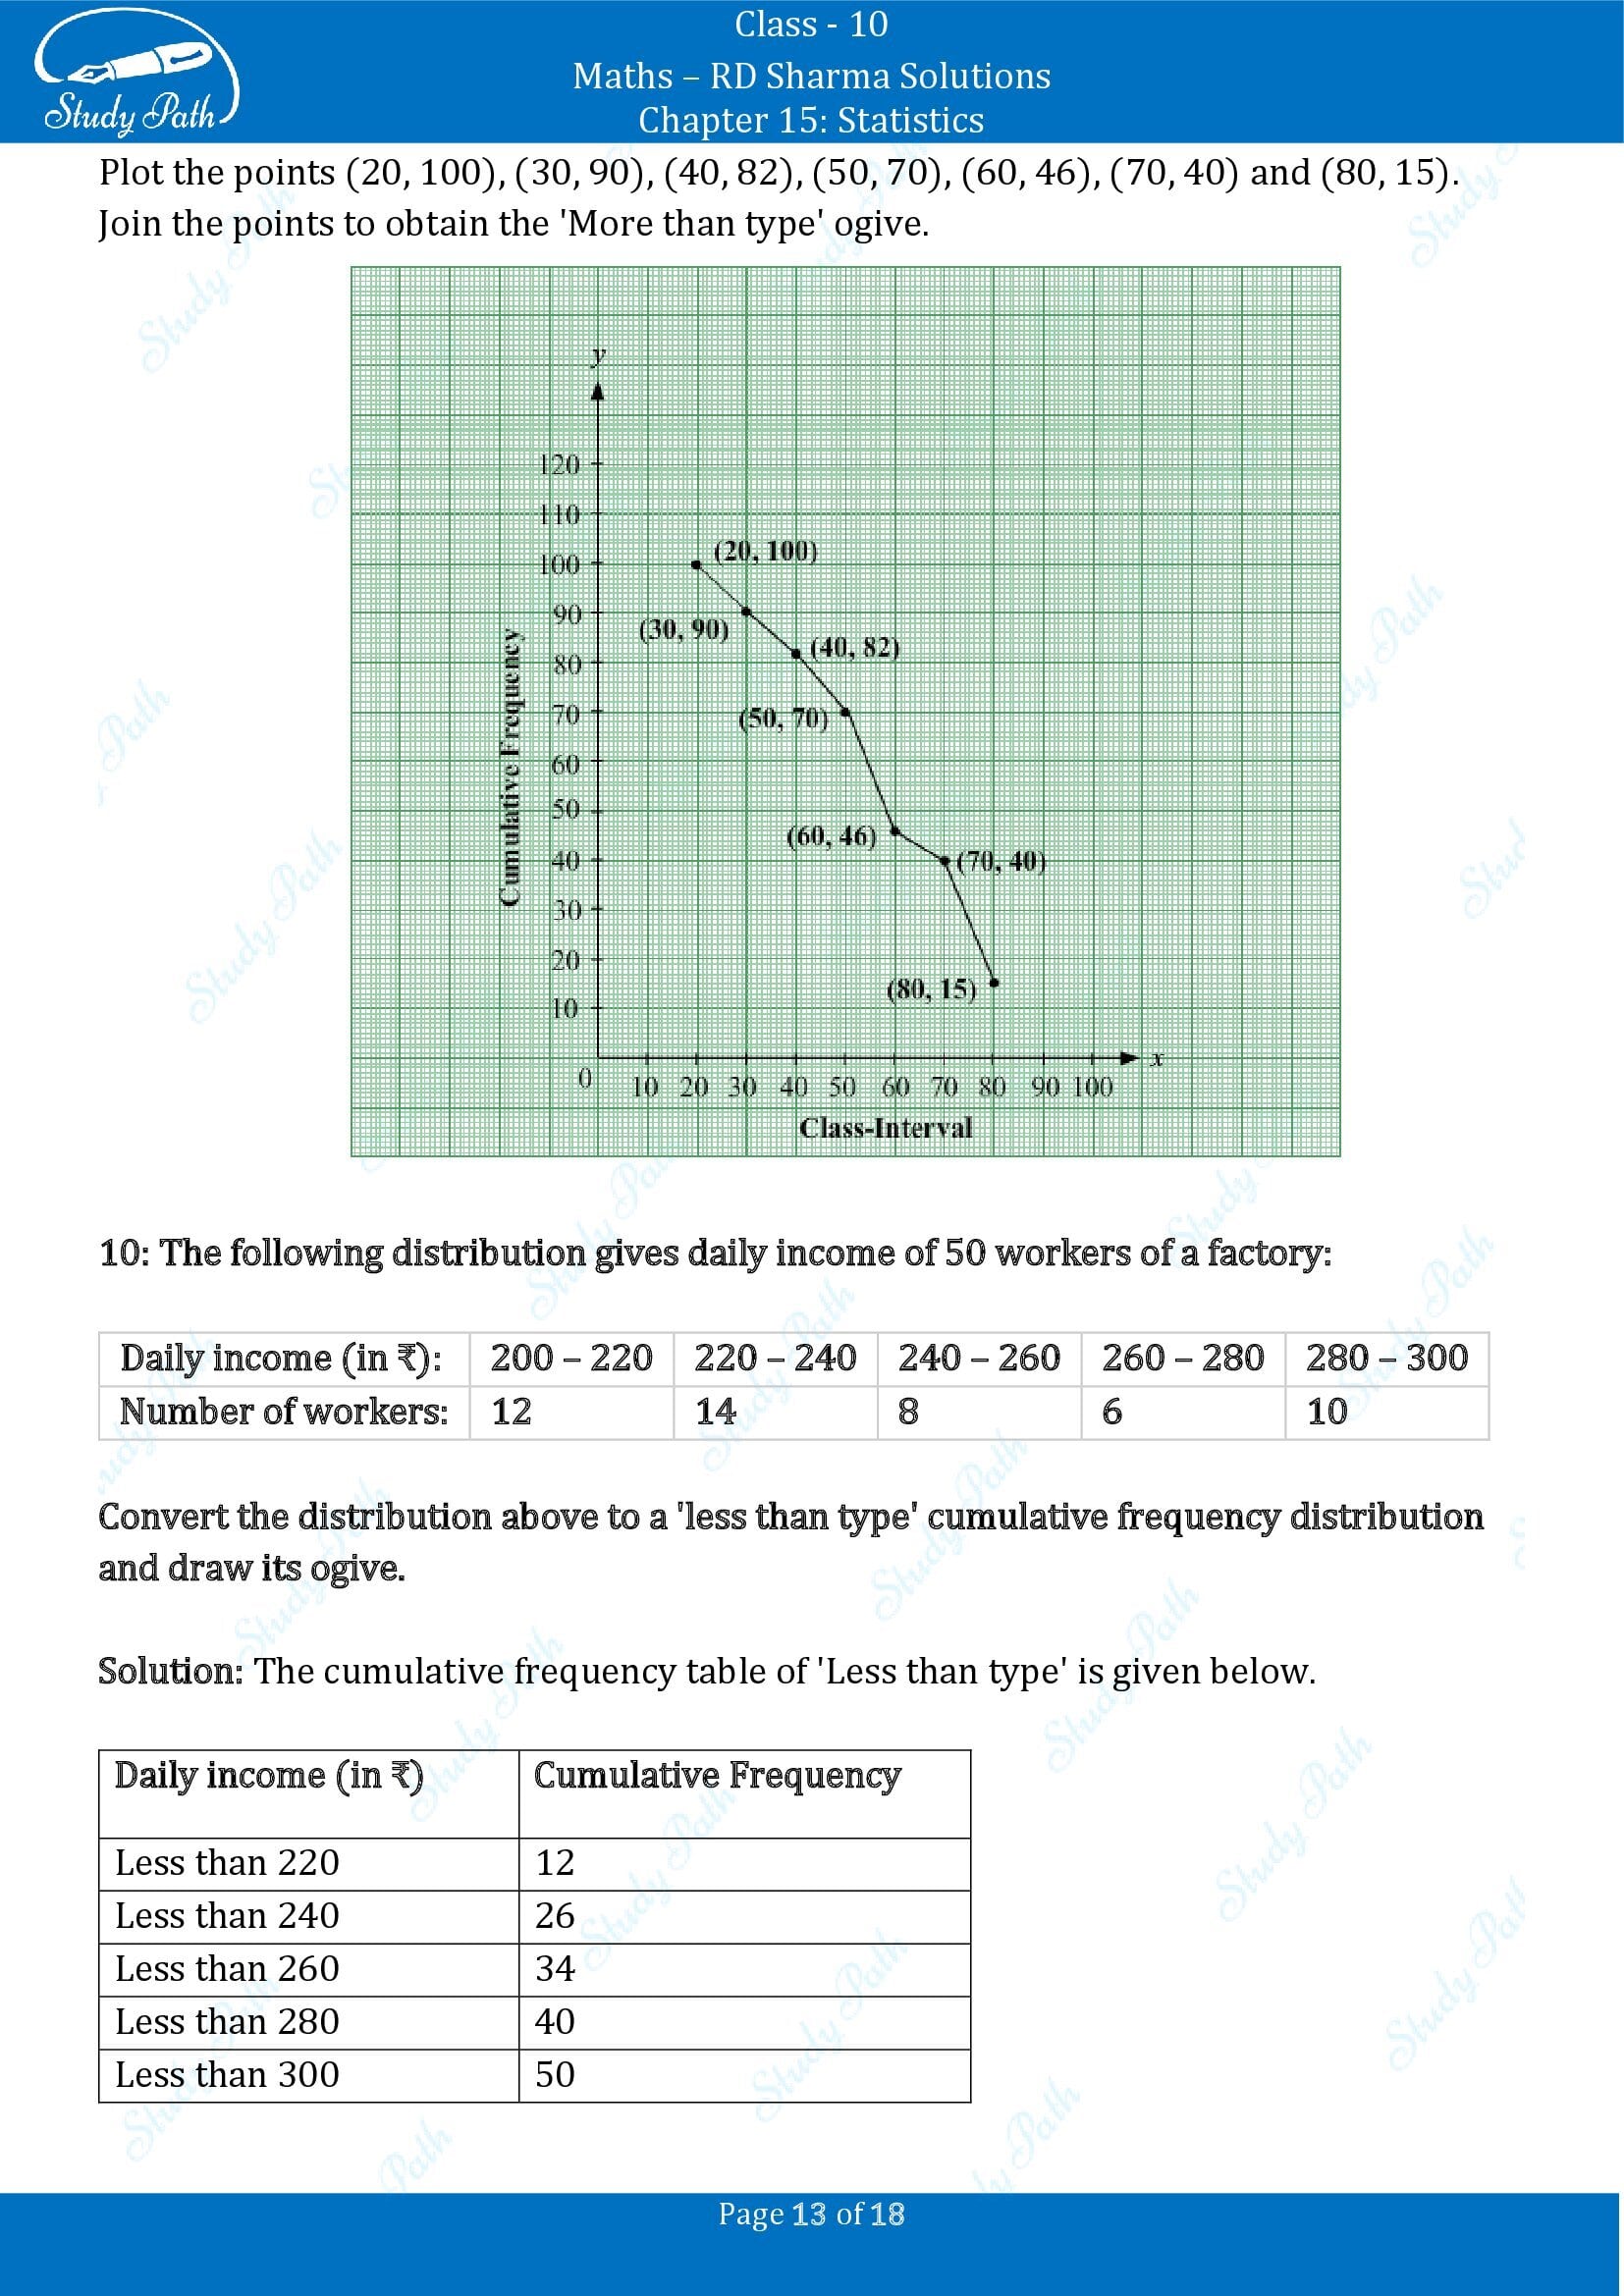 RD Sharma Solutions Class 10 Chapter 15 Statistics Exercise 15.6 00013